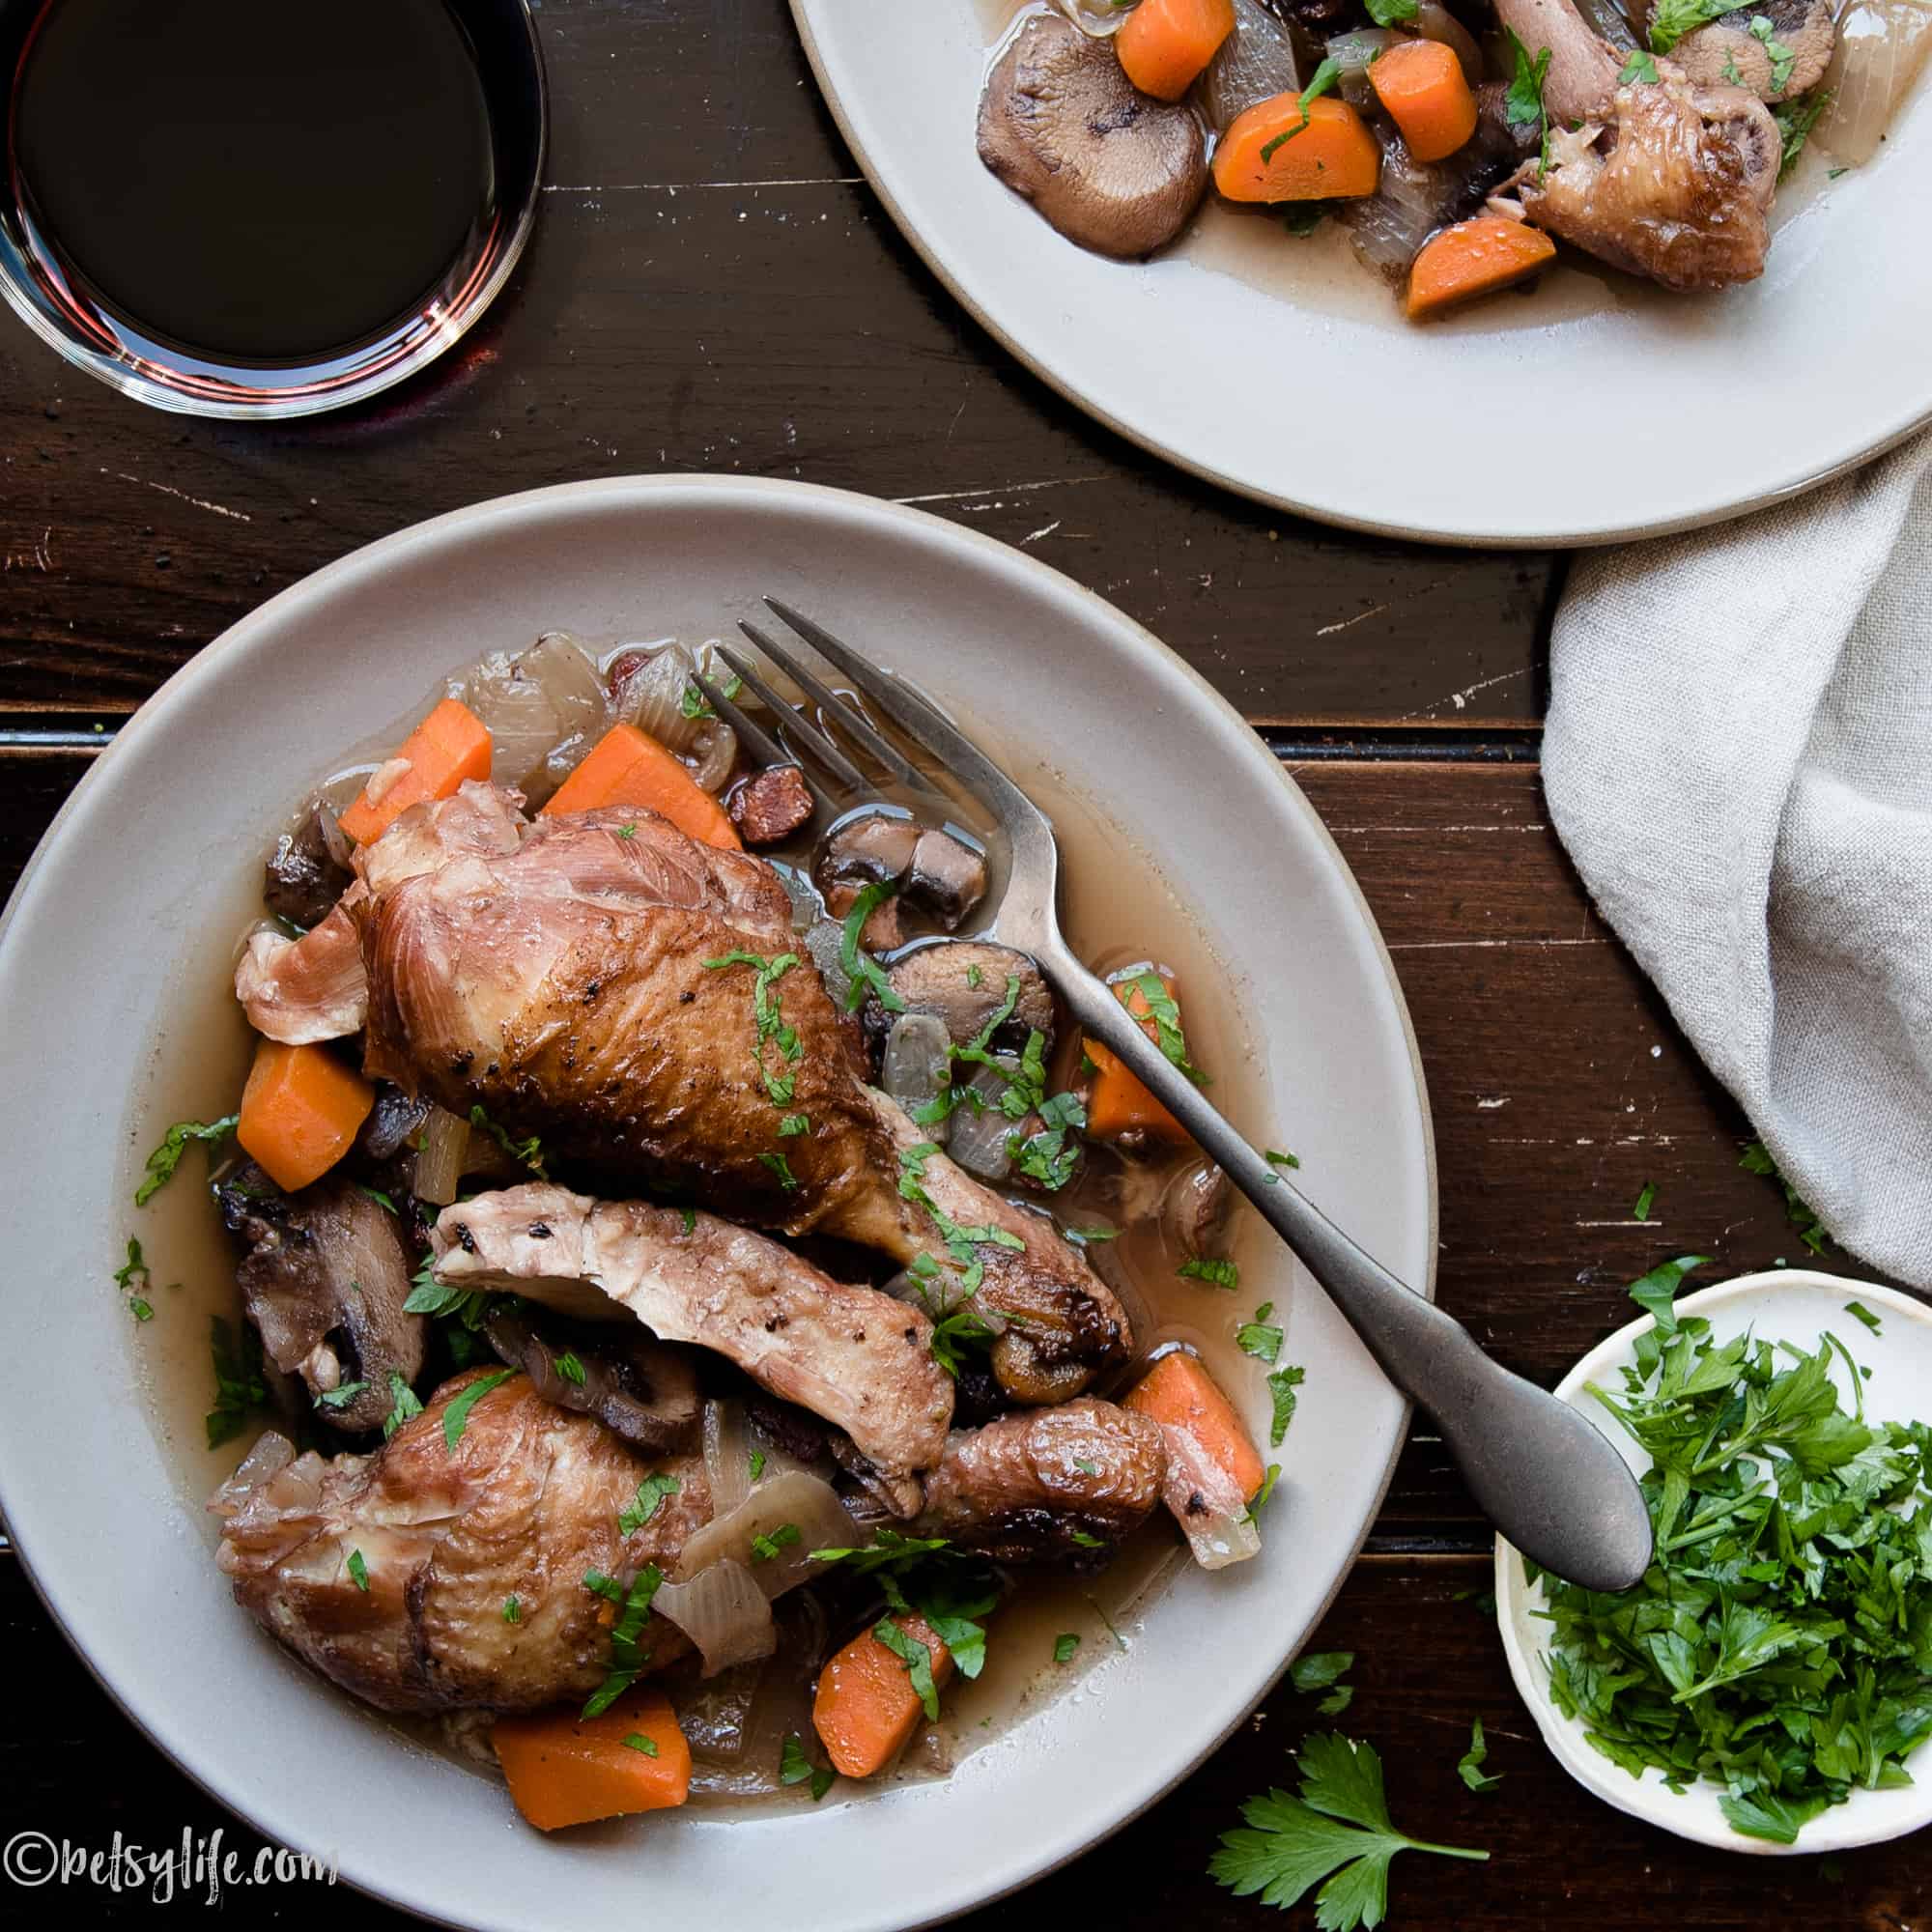 Plate with Coq au vin and and veggies next to a glass of wine and fresh herbs